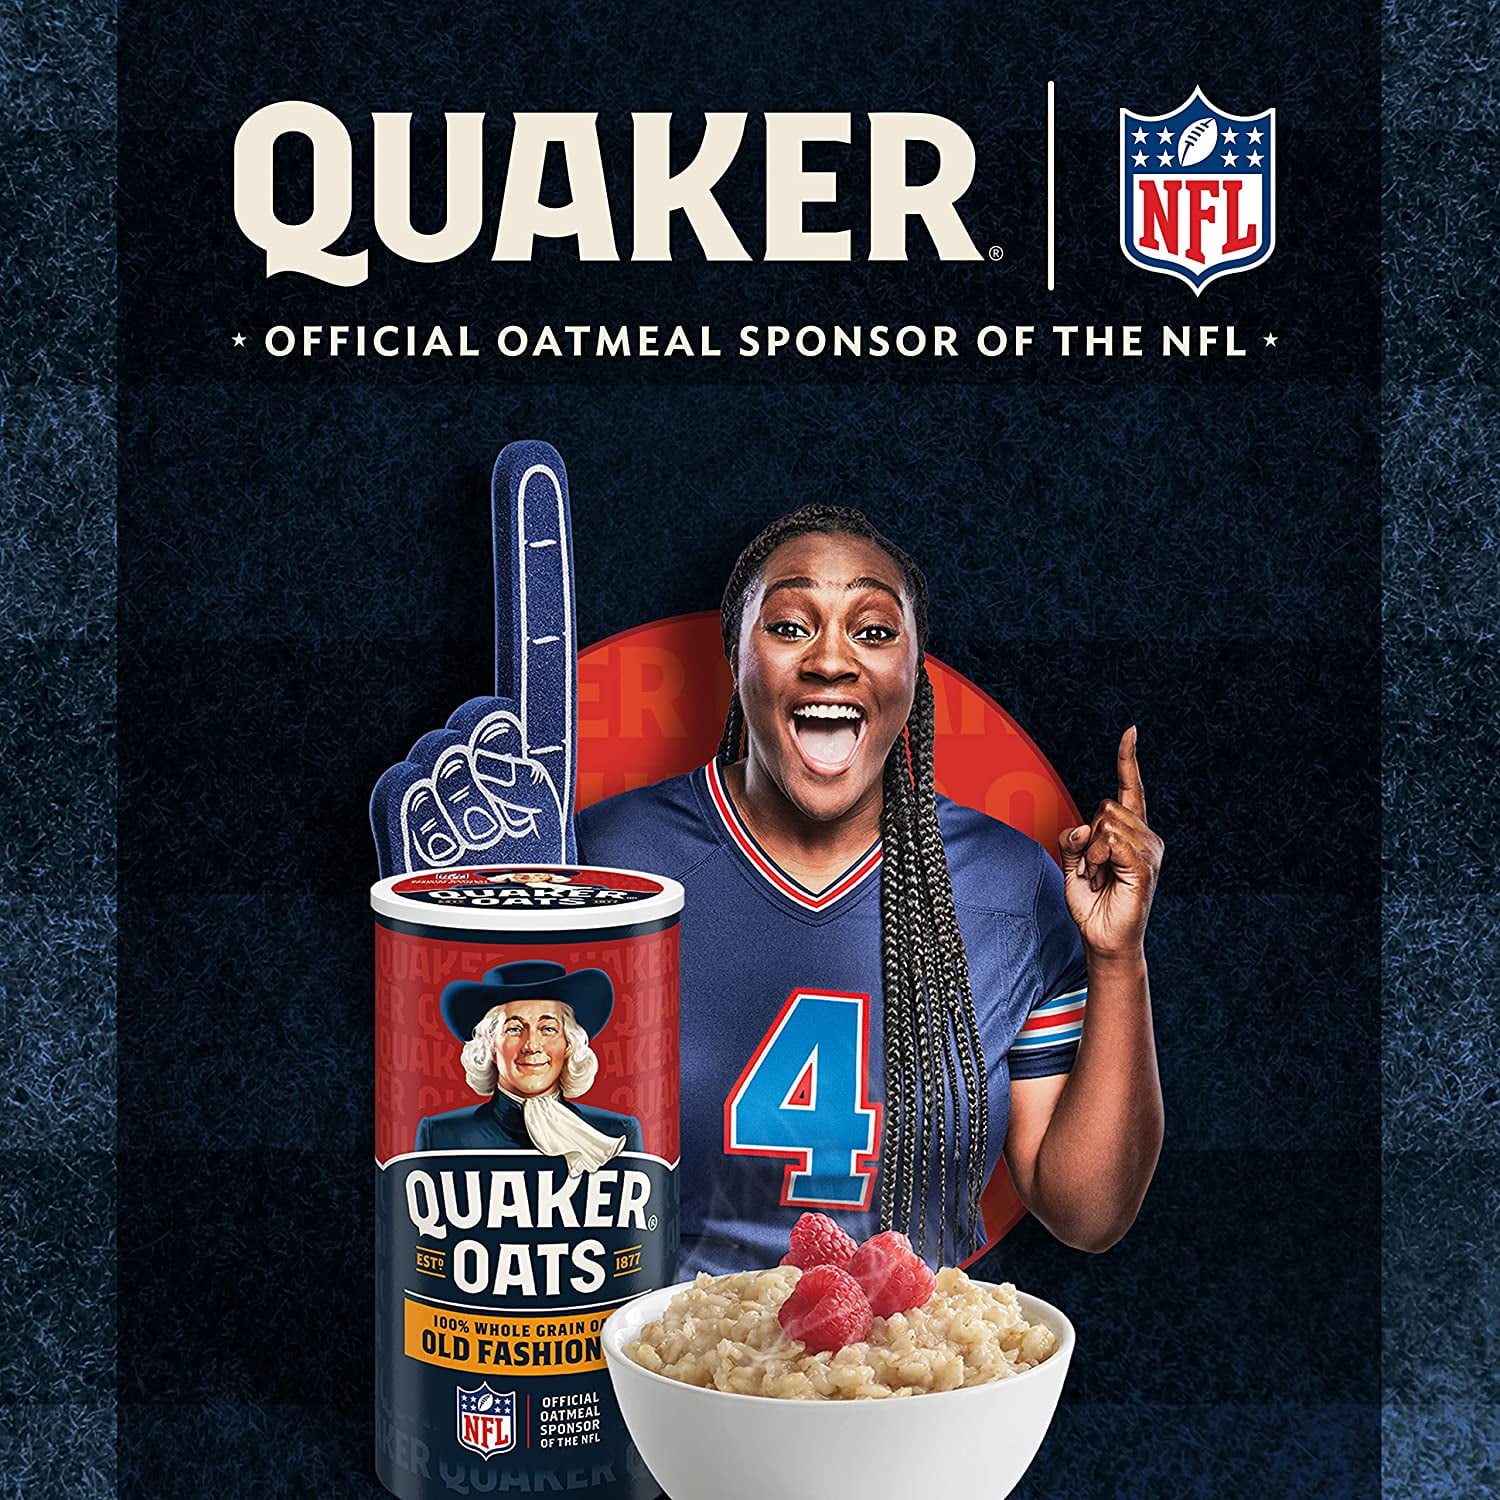 Quaker, Old Fashioned Oatmeal, Whole Grain, Cook on Stovetop or Microwave,  42 oz Canister 